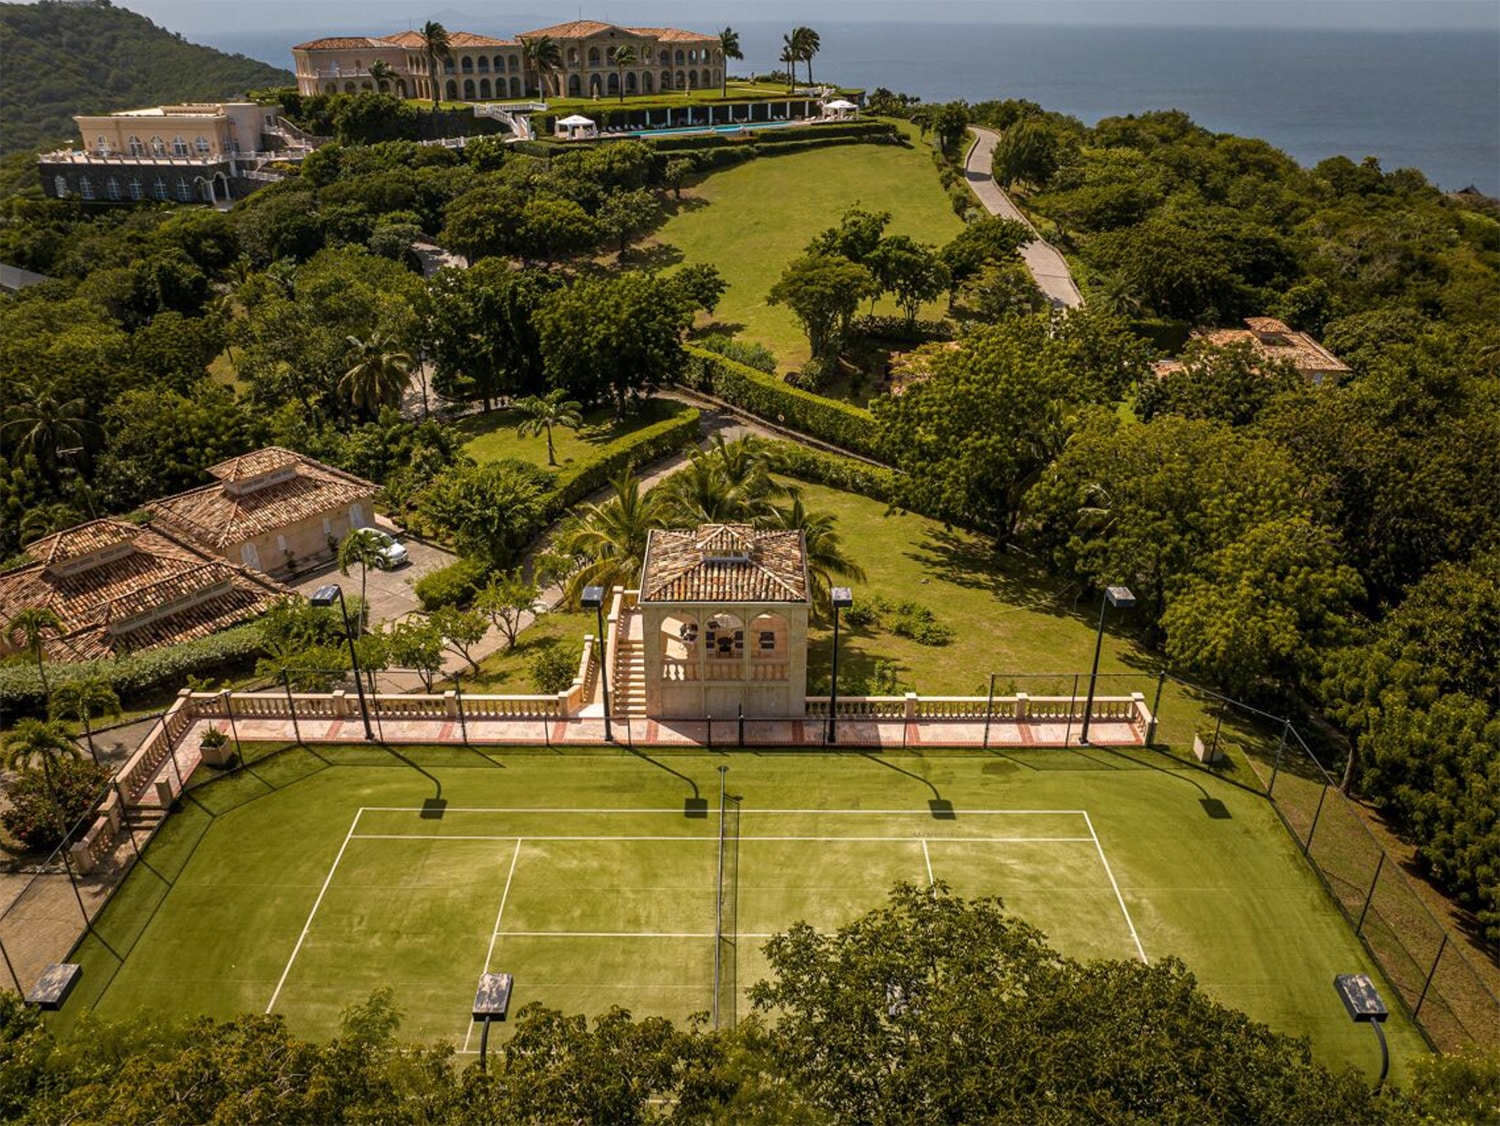 An aerial view of the tennis court and gardens of The Terraces, a $200 million dream home on the Caribbean island of Mustique in St. Vincent and the Grenadines.